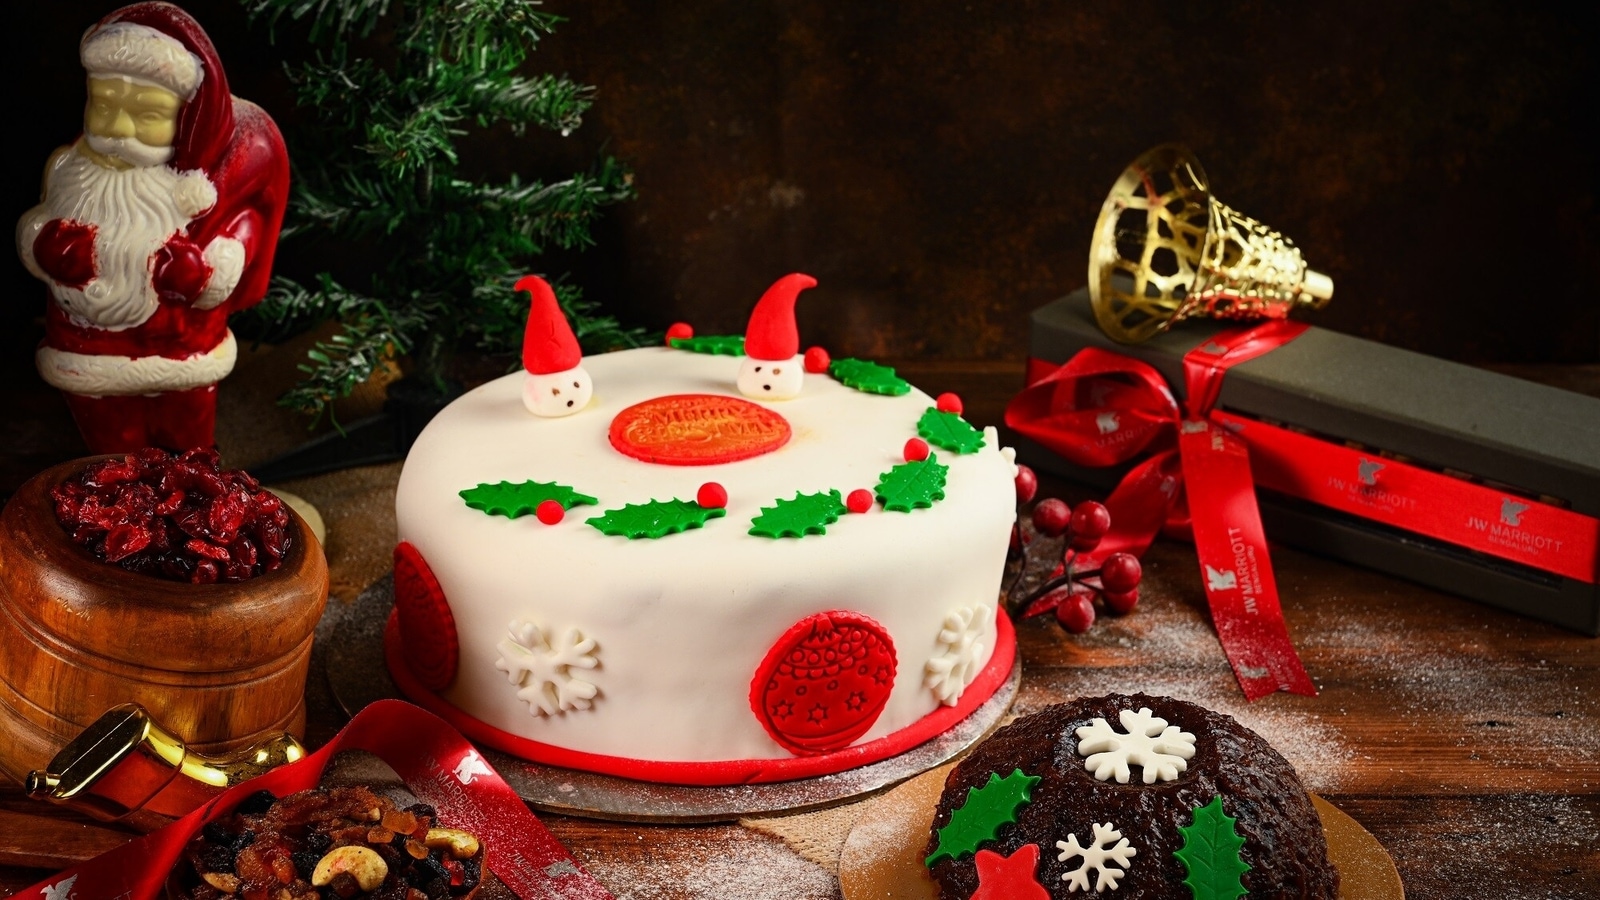 Best Christmas cakes recipes that you can whip up at home in a ...